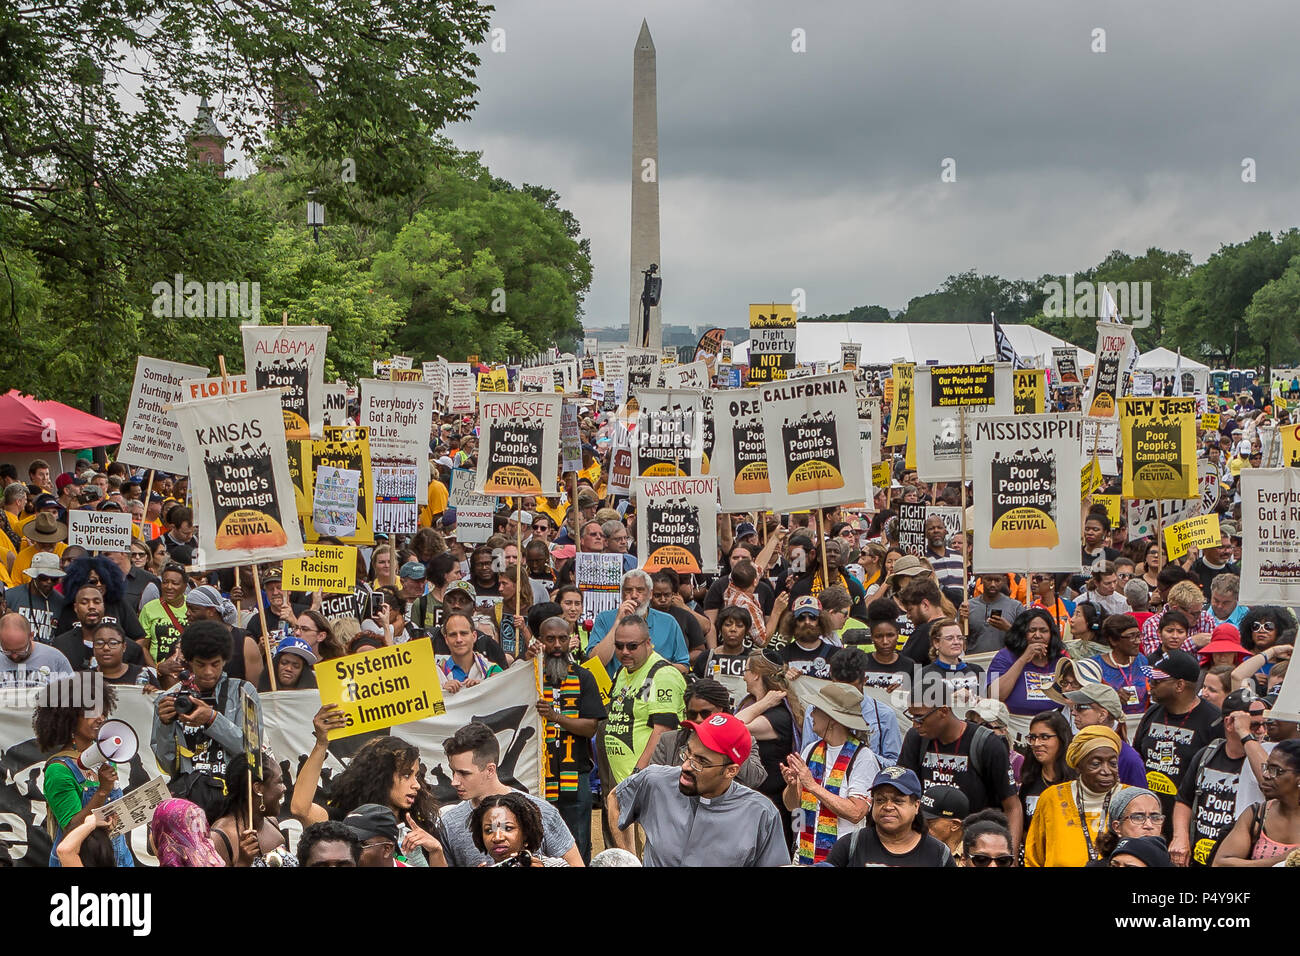 Washington Dc, United States. 23rd June, 2018. More than 10,000 participants in the Poor People's Campaign: A National Call for Moral Revival converged on the U.S. Capitol. The march marks the culmination of a historic six-week engagement of nonviolent direct action across the United State, which challenged America's political, economic, and moral structures. Credit: Michael Nigro/Pacific Press/Alamy Live News Stock Photo